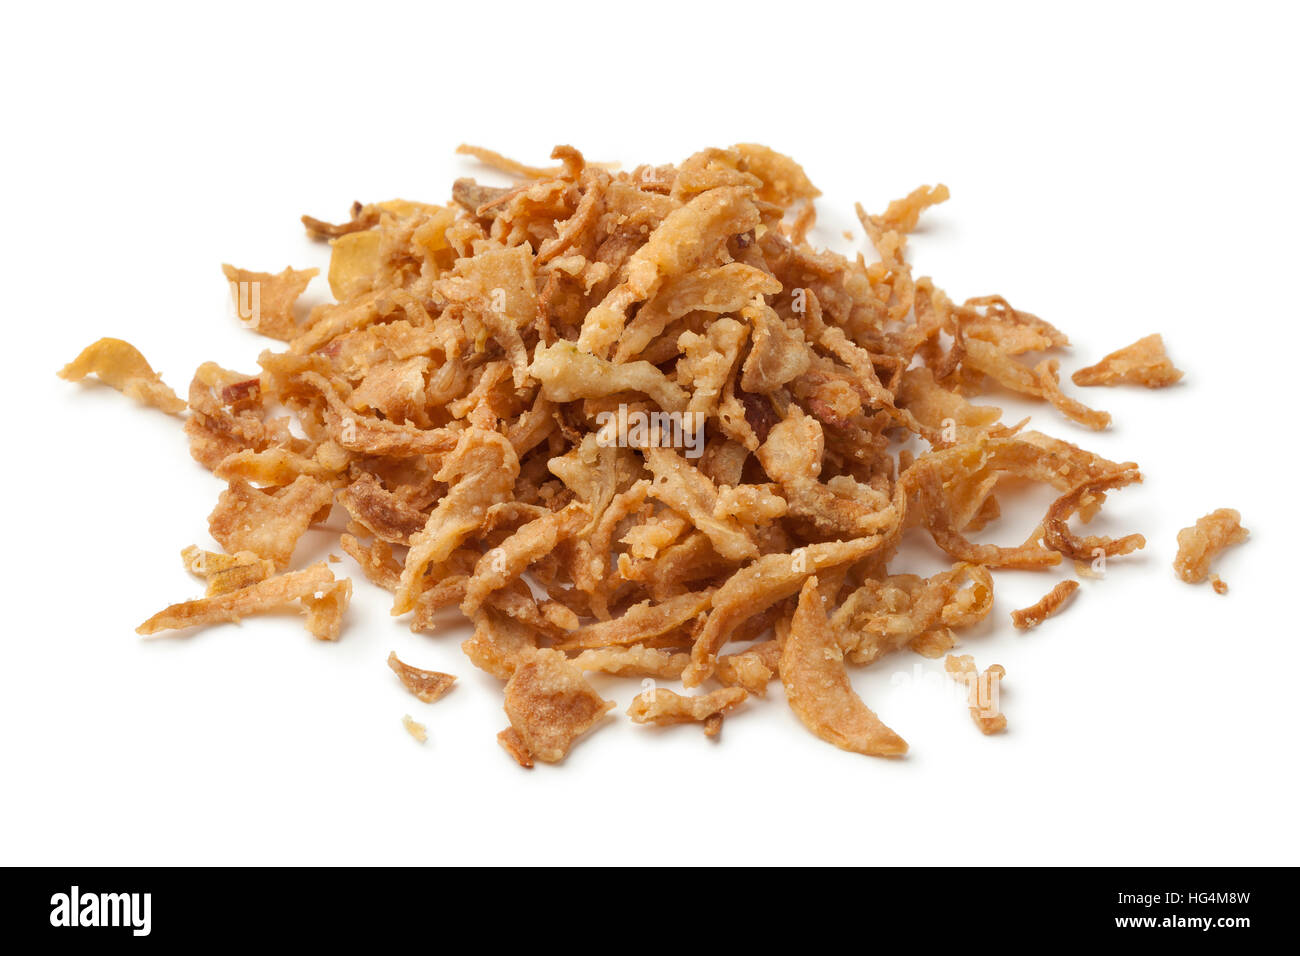 Heap of baked onions isolated on white background Stock Photo